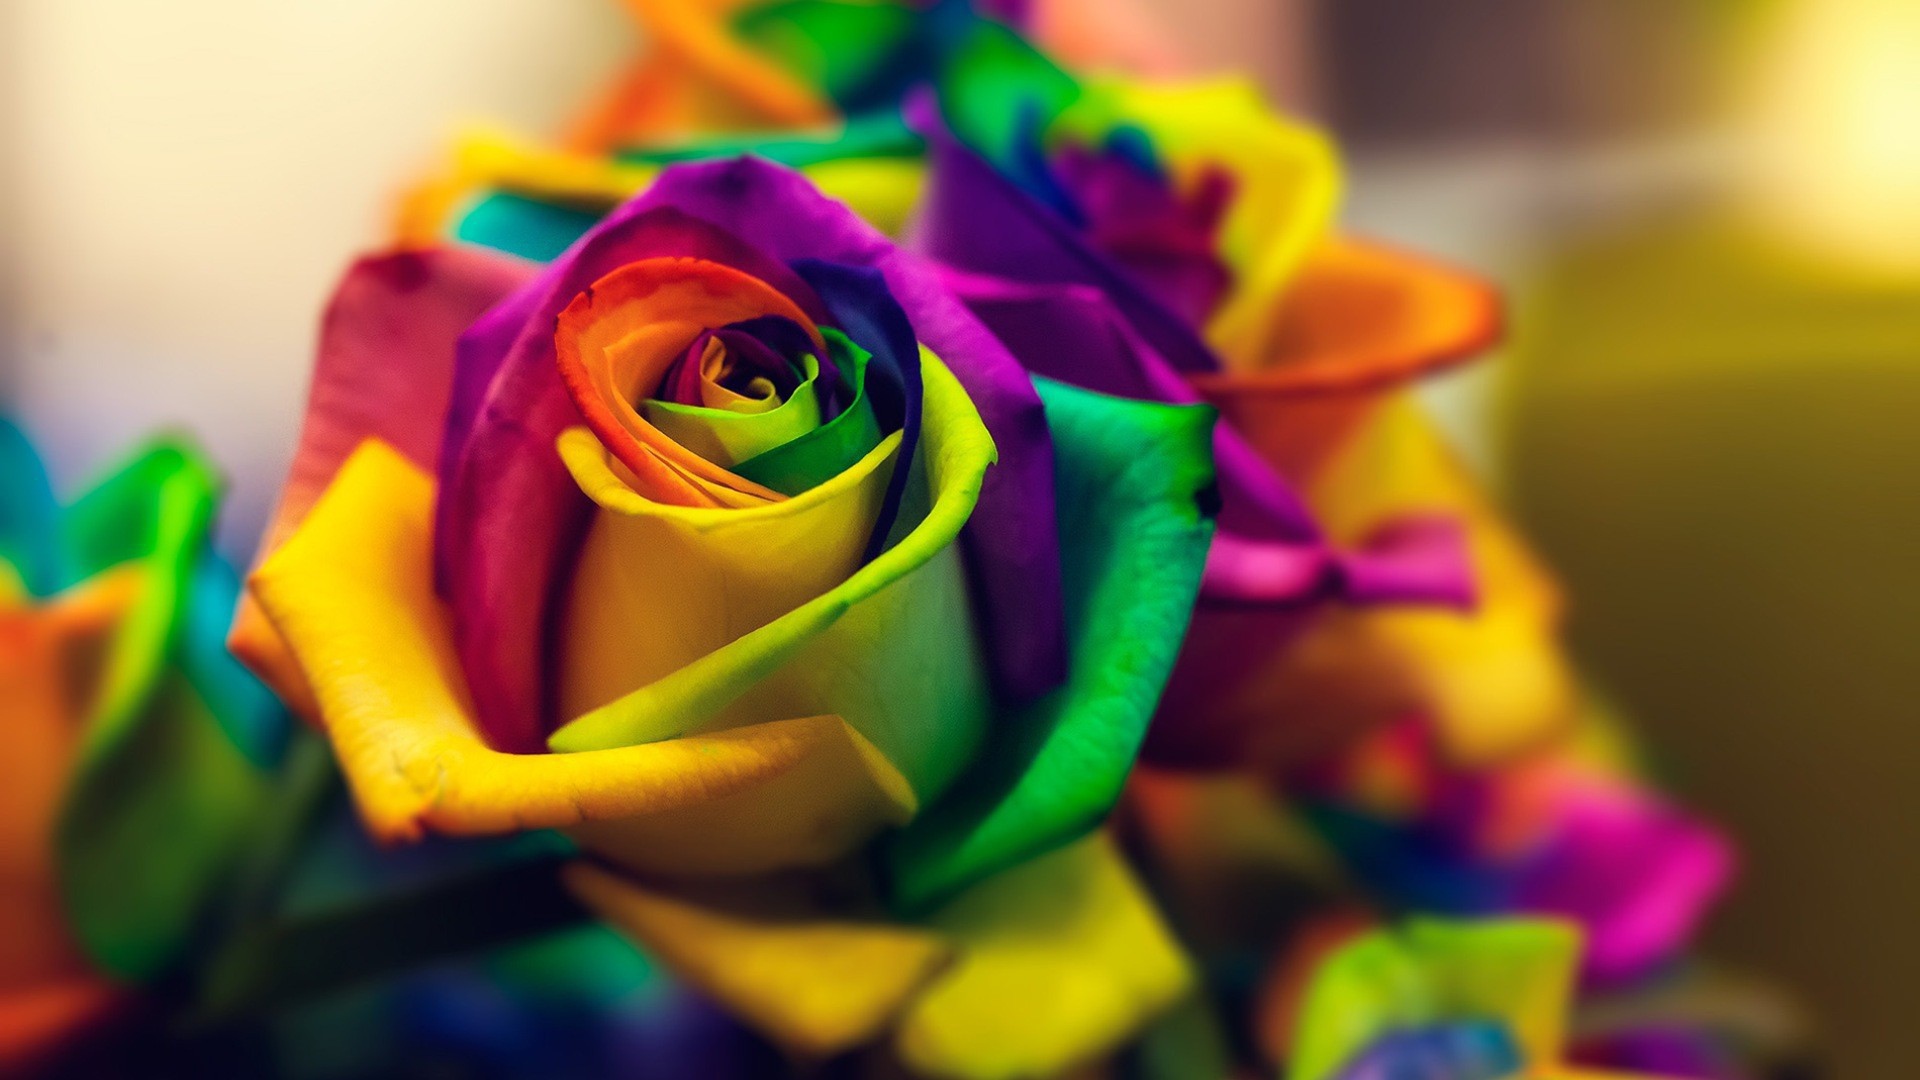 Bright rose with petals of different colors